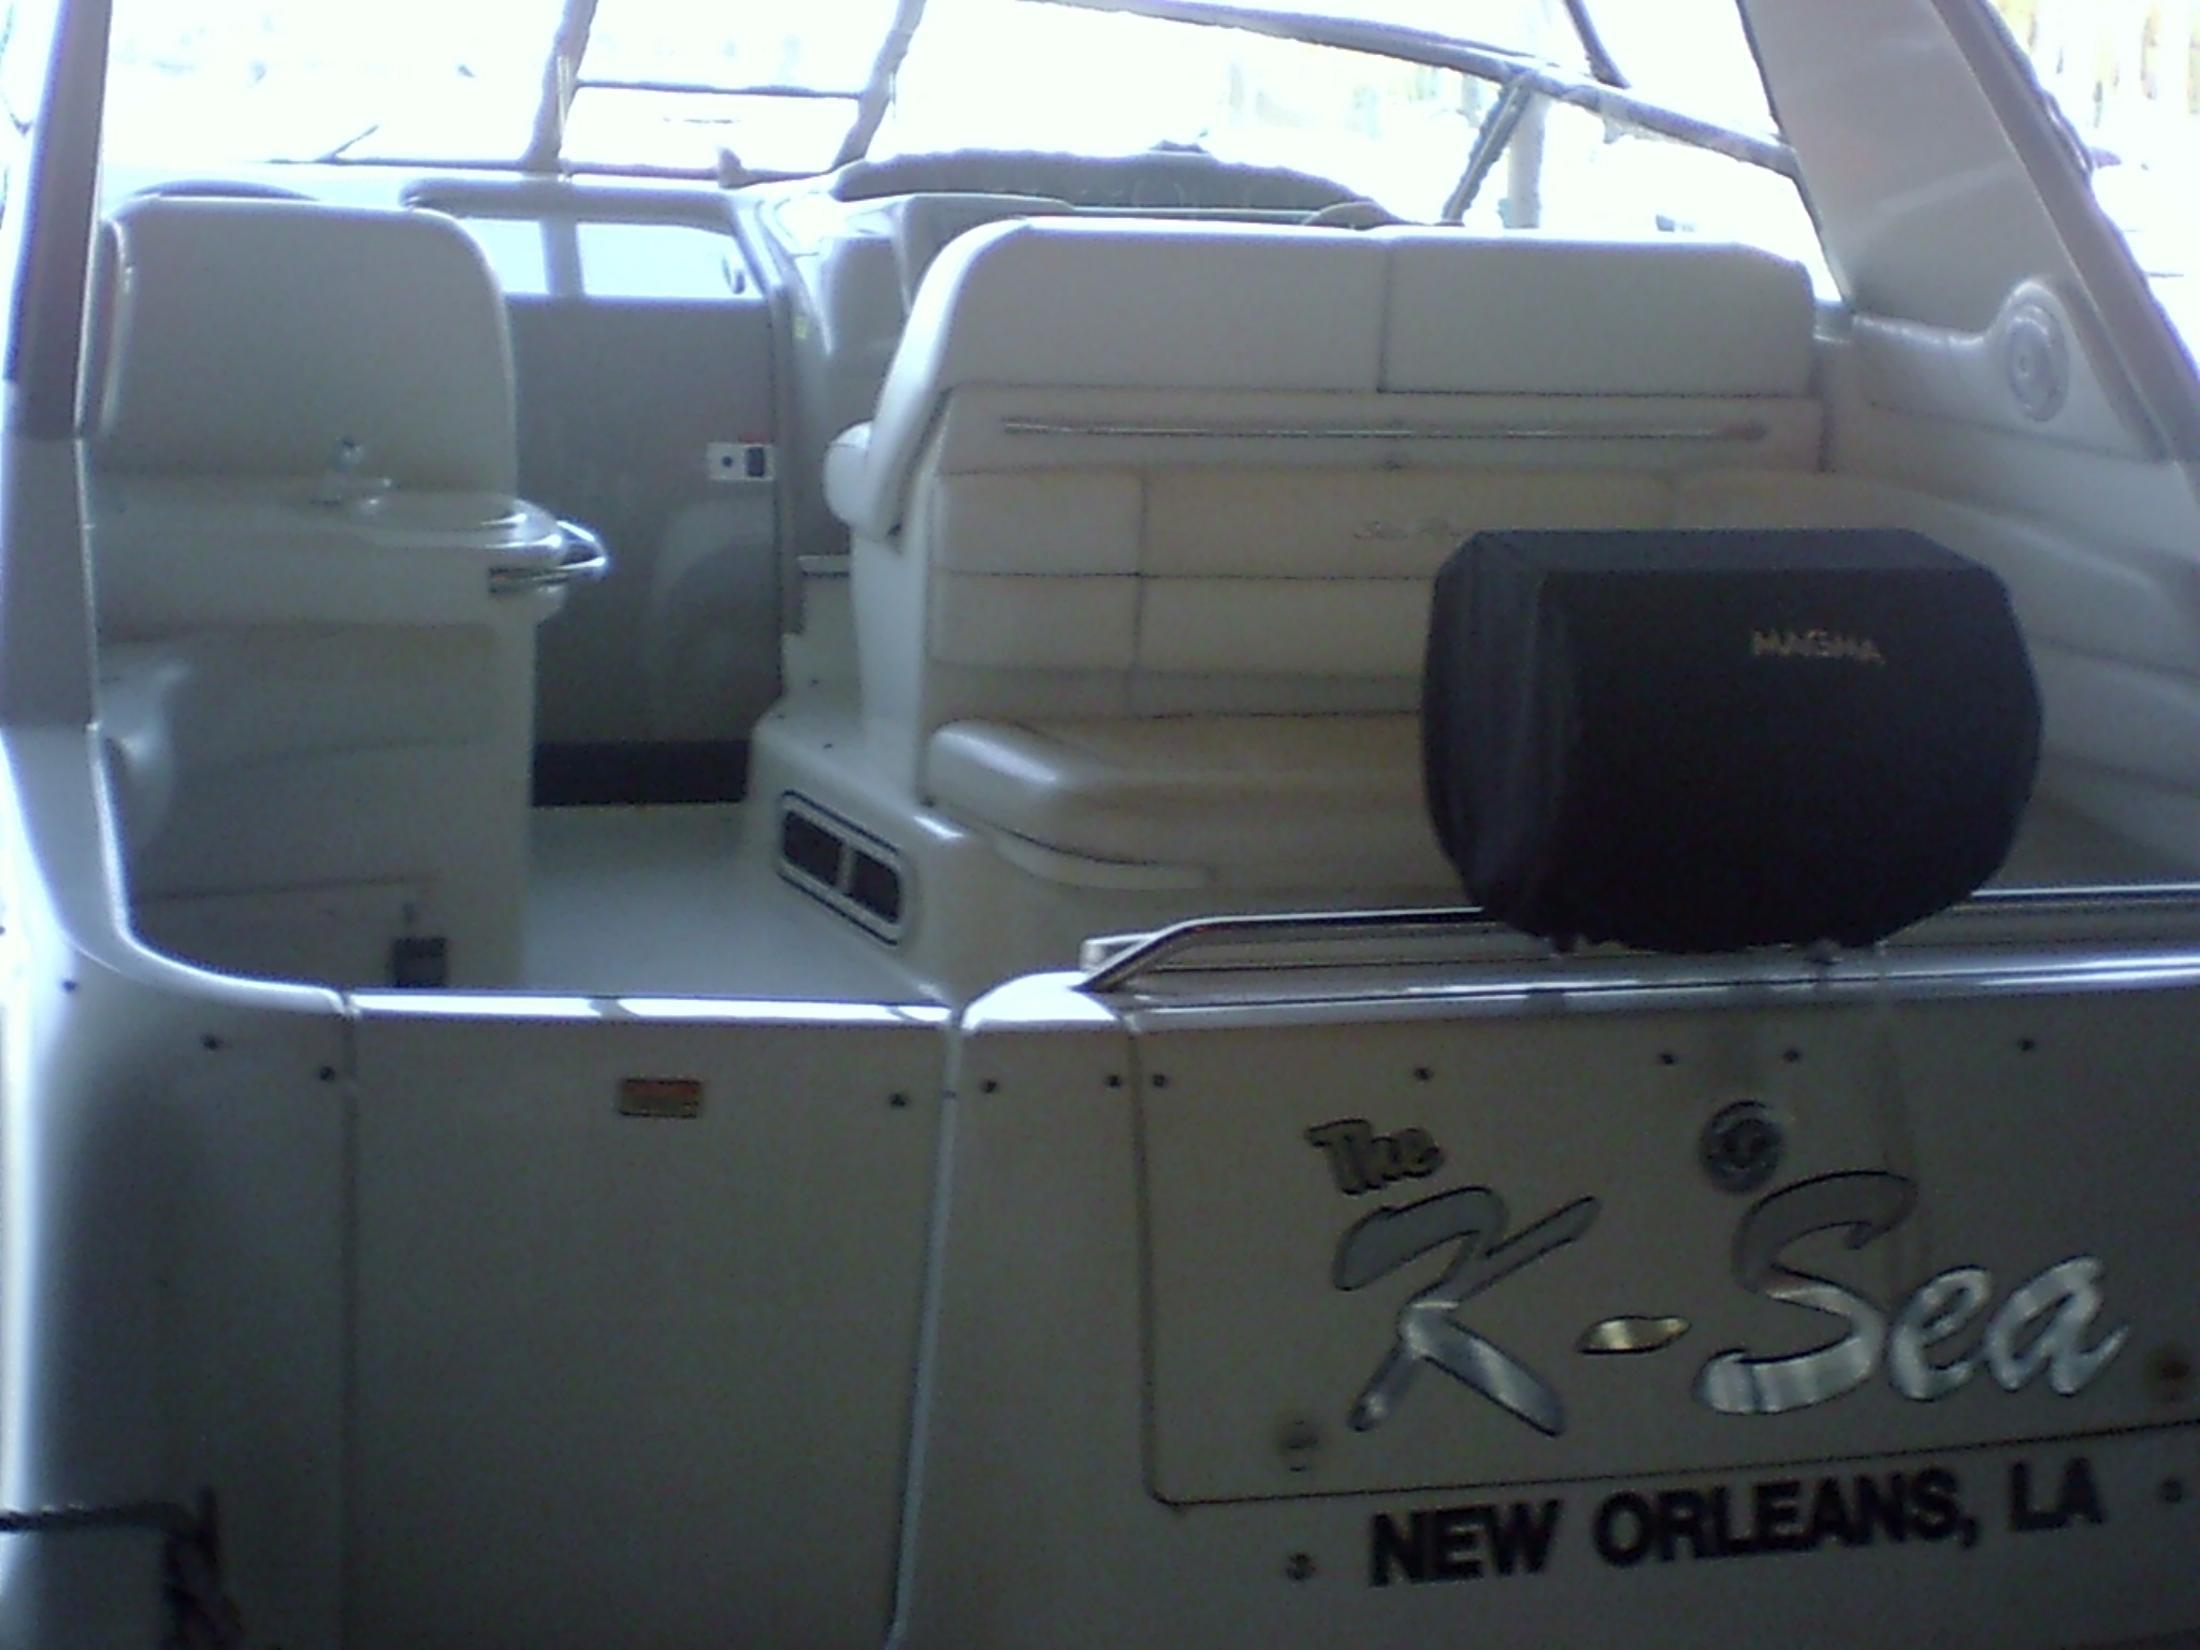 Sea Ray 370 Express Cruiser, New Orleans